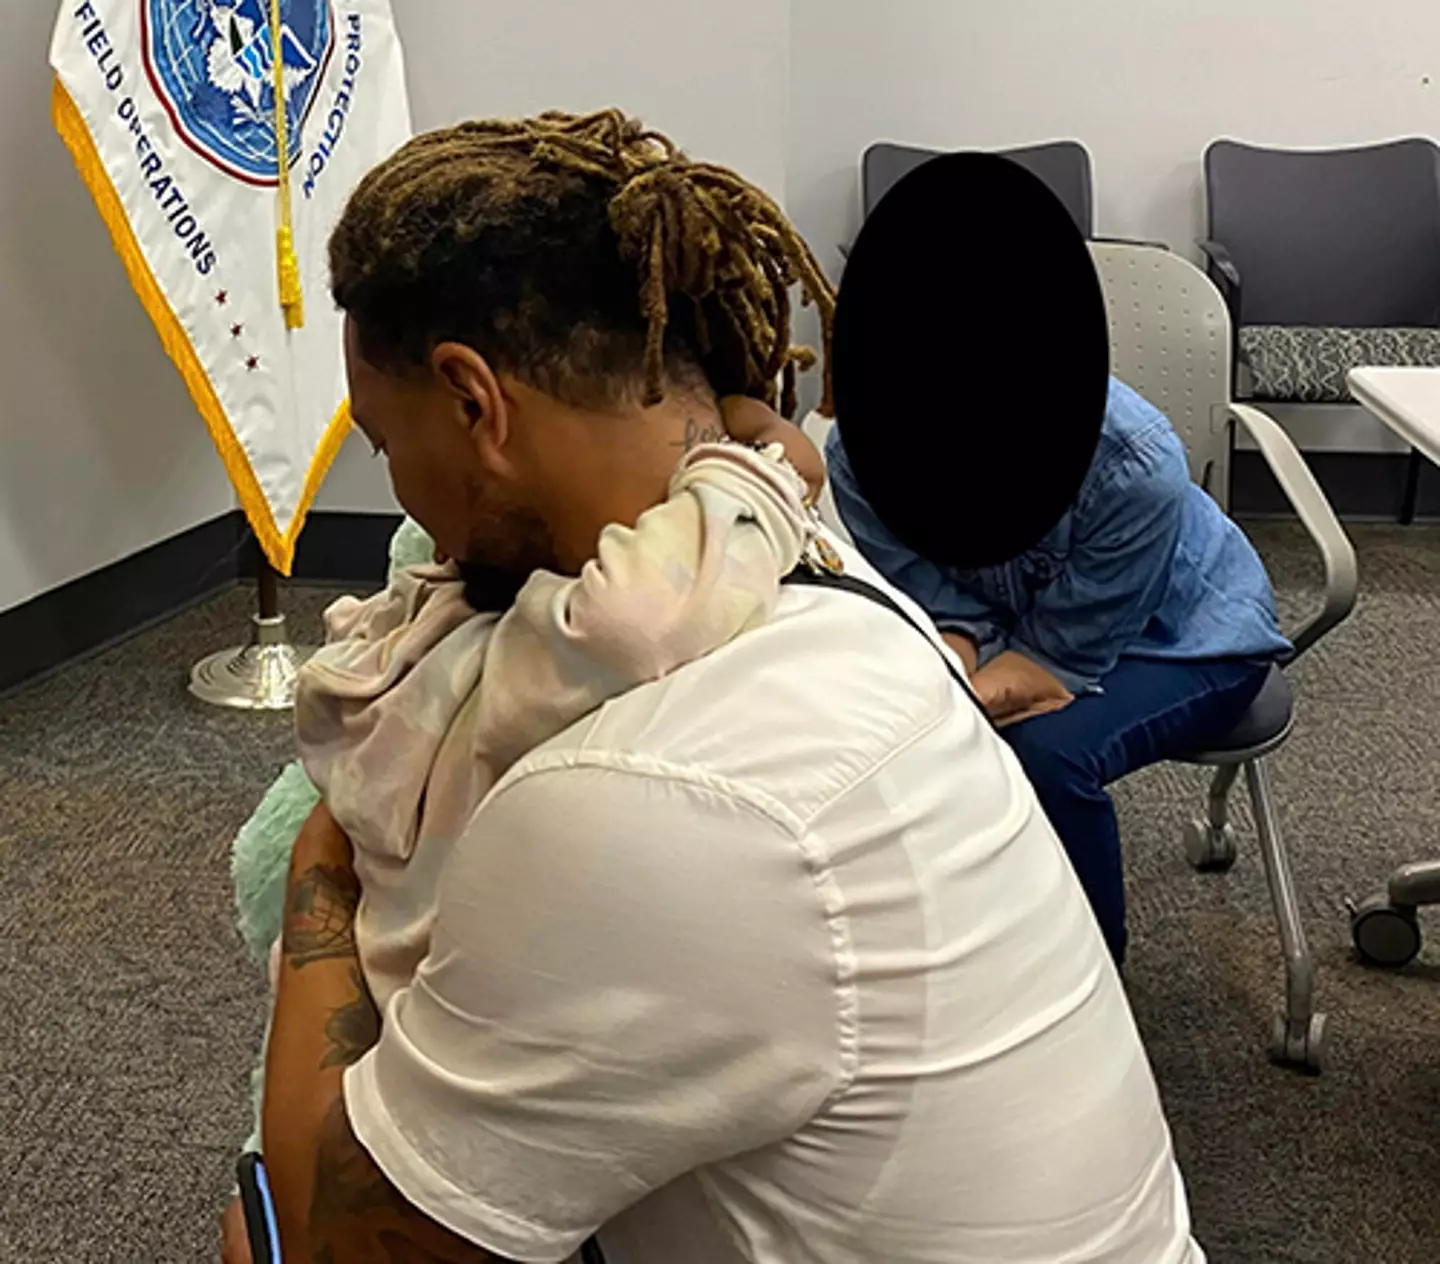 James Williams and his daughter Majesty were reunited two years after she went missing.